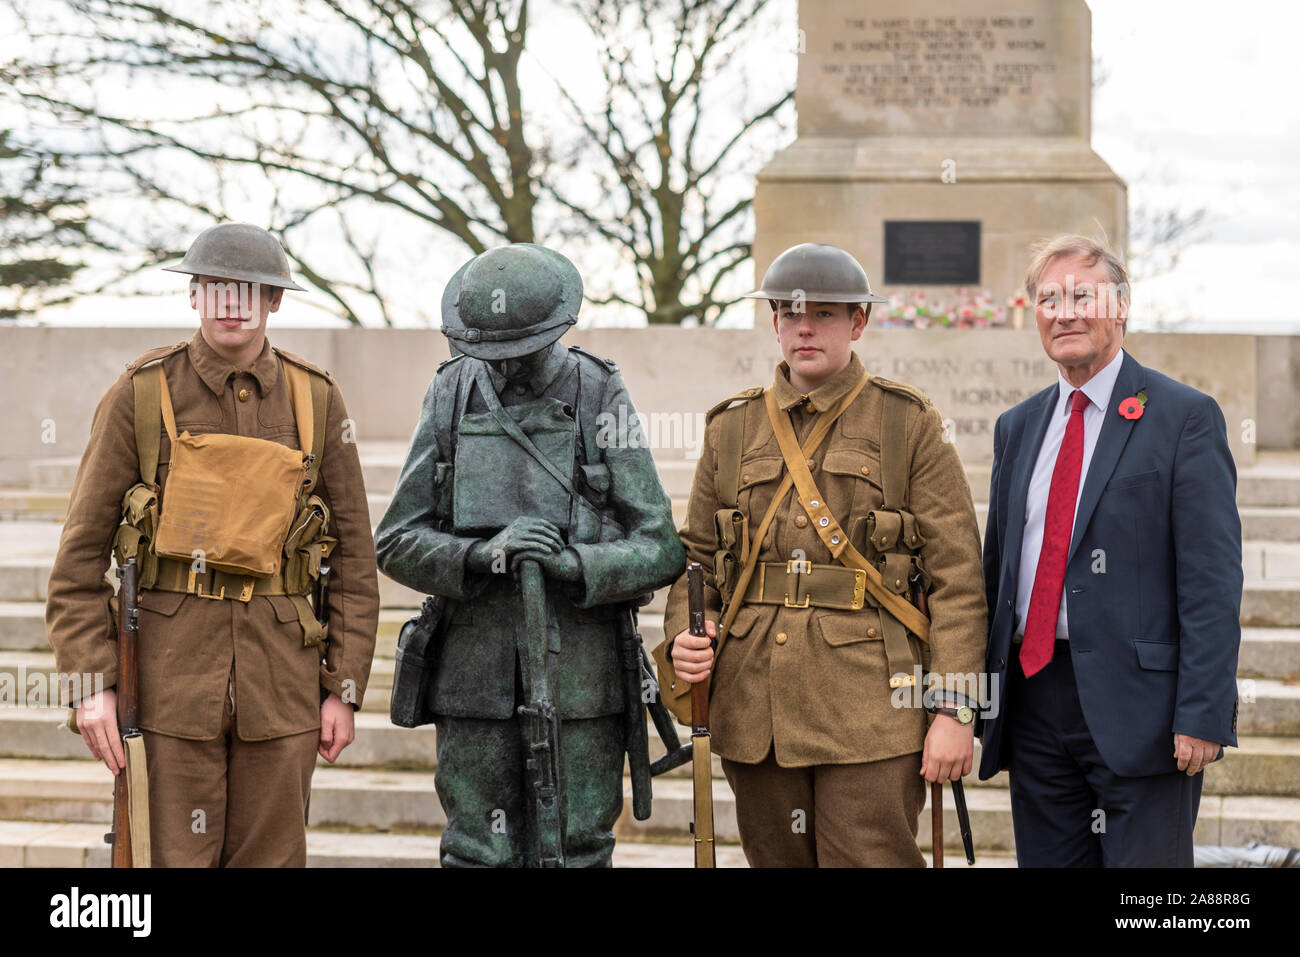 Southend Cenotaph, Southend on Sea, Essex, UK. A bronze statue of a British ‘Tommy’ soldier has been unveiled in front of the Lutyens designed war memorial in preparation for Remembrance Sunday. The statue has been created by local artist and sculptor Dave Taylor using young WWI re-enactor Ethan Harvey (left of statue) as a model to create a faithful replica of what a soldier would look like on the first day of the Battle of the Somme. Local Tory politician Sir David Amess, MP for Southend West, attended. Ethan's brother Reuben also attended in uniform Stock Photo